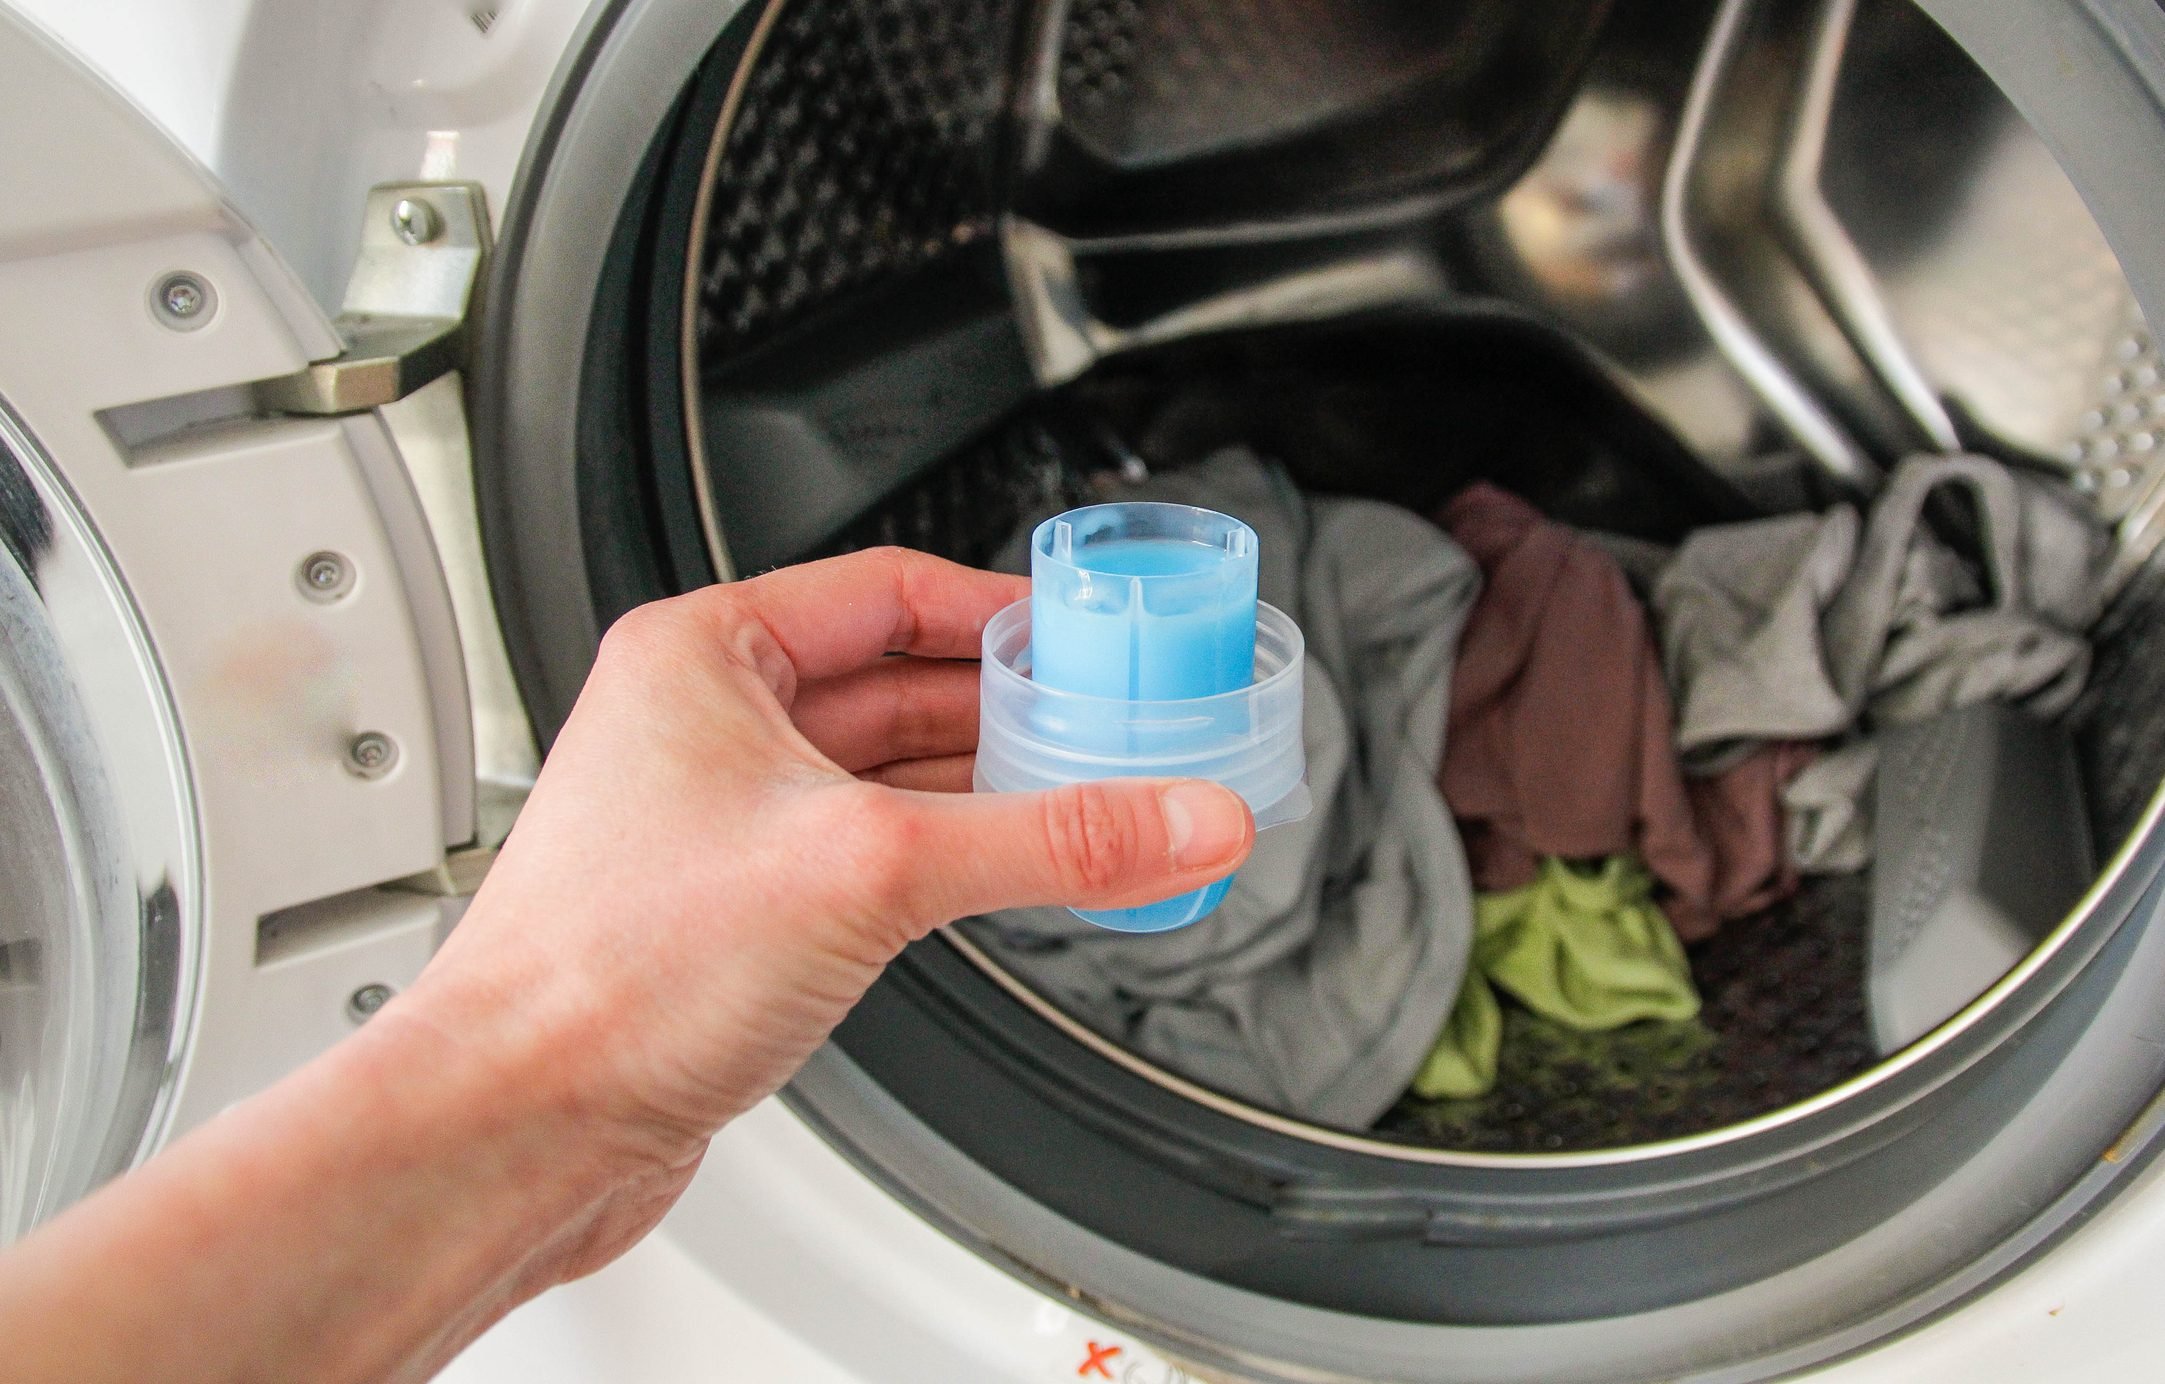 Best Washing Machine Cleaners in 2023 - Top Rated Washer Cleaning